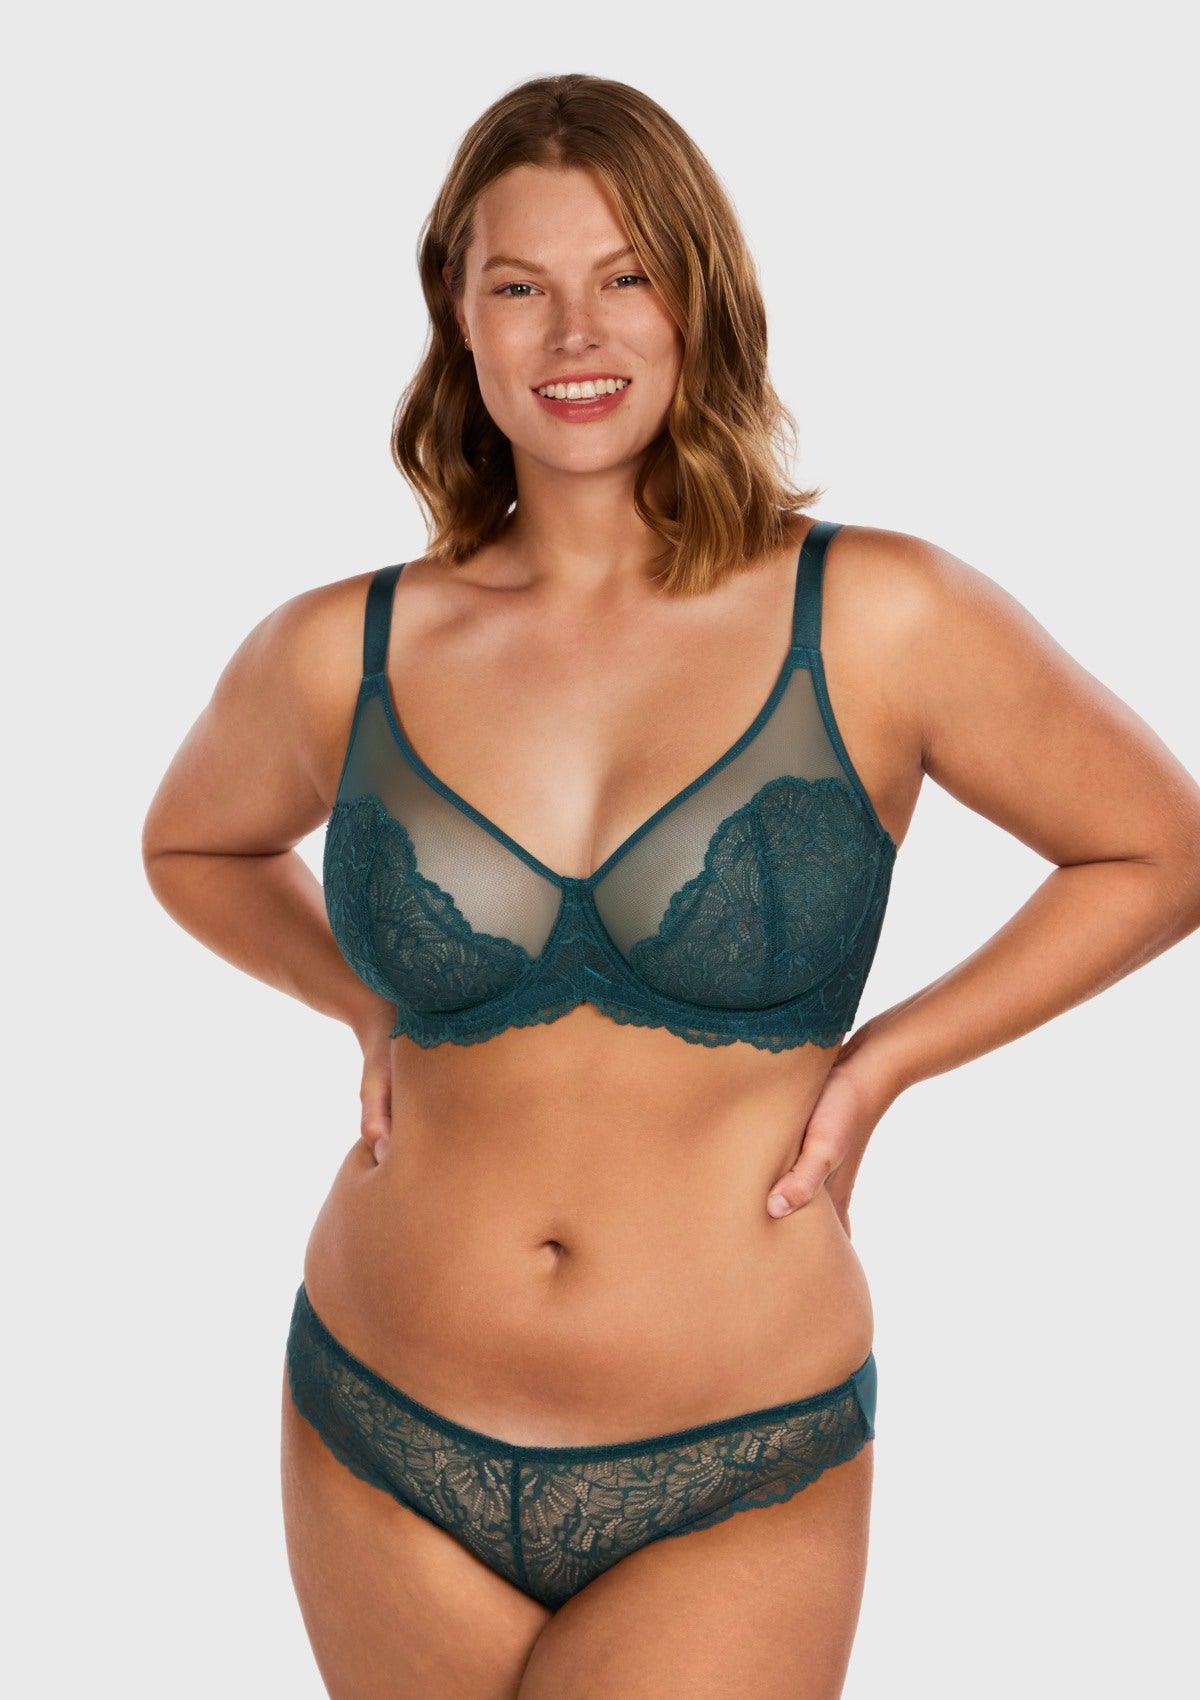 HSIA Blossom Full Figure See-Through Lace Bra For Side And Back Fat - Dark Blue / 40 / DD/E